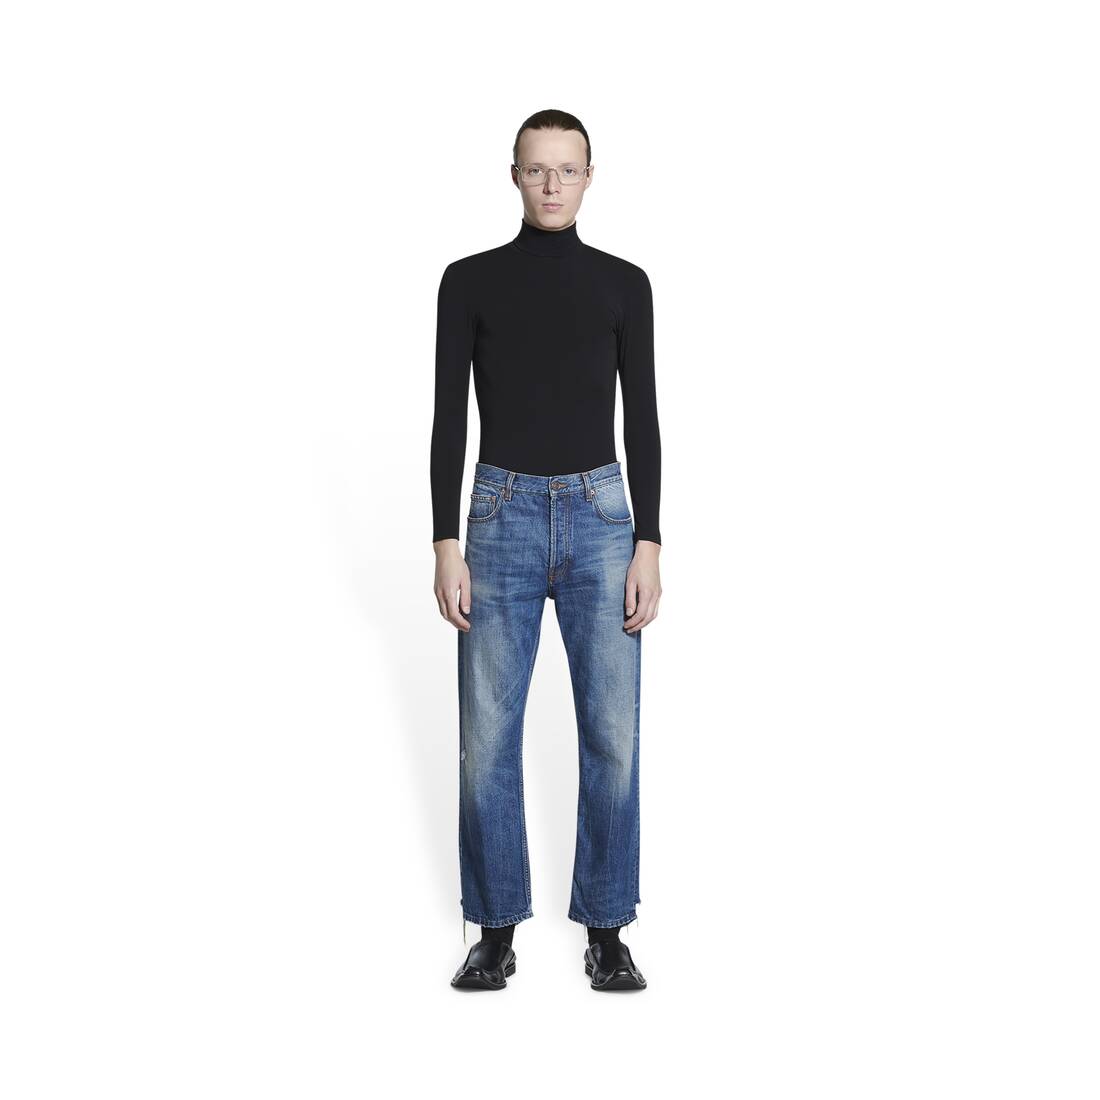 Shop the Balenciaga Jeans with Trackpants Attached Here